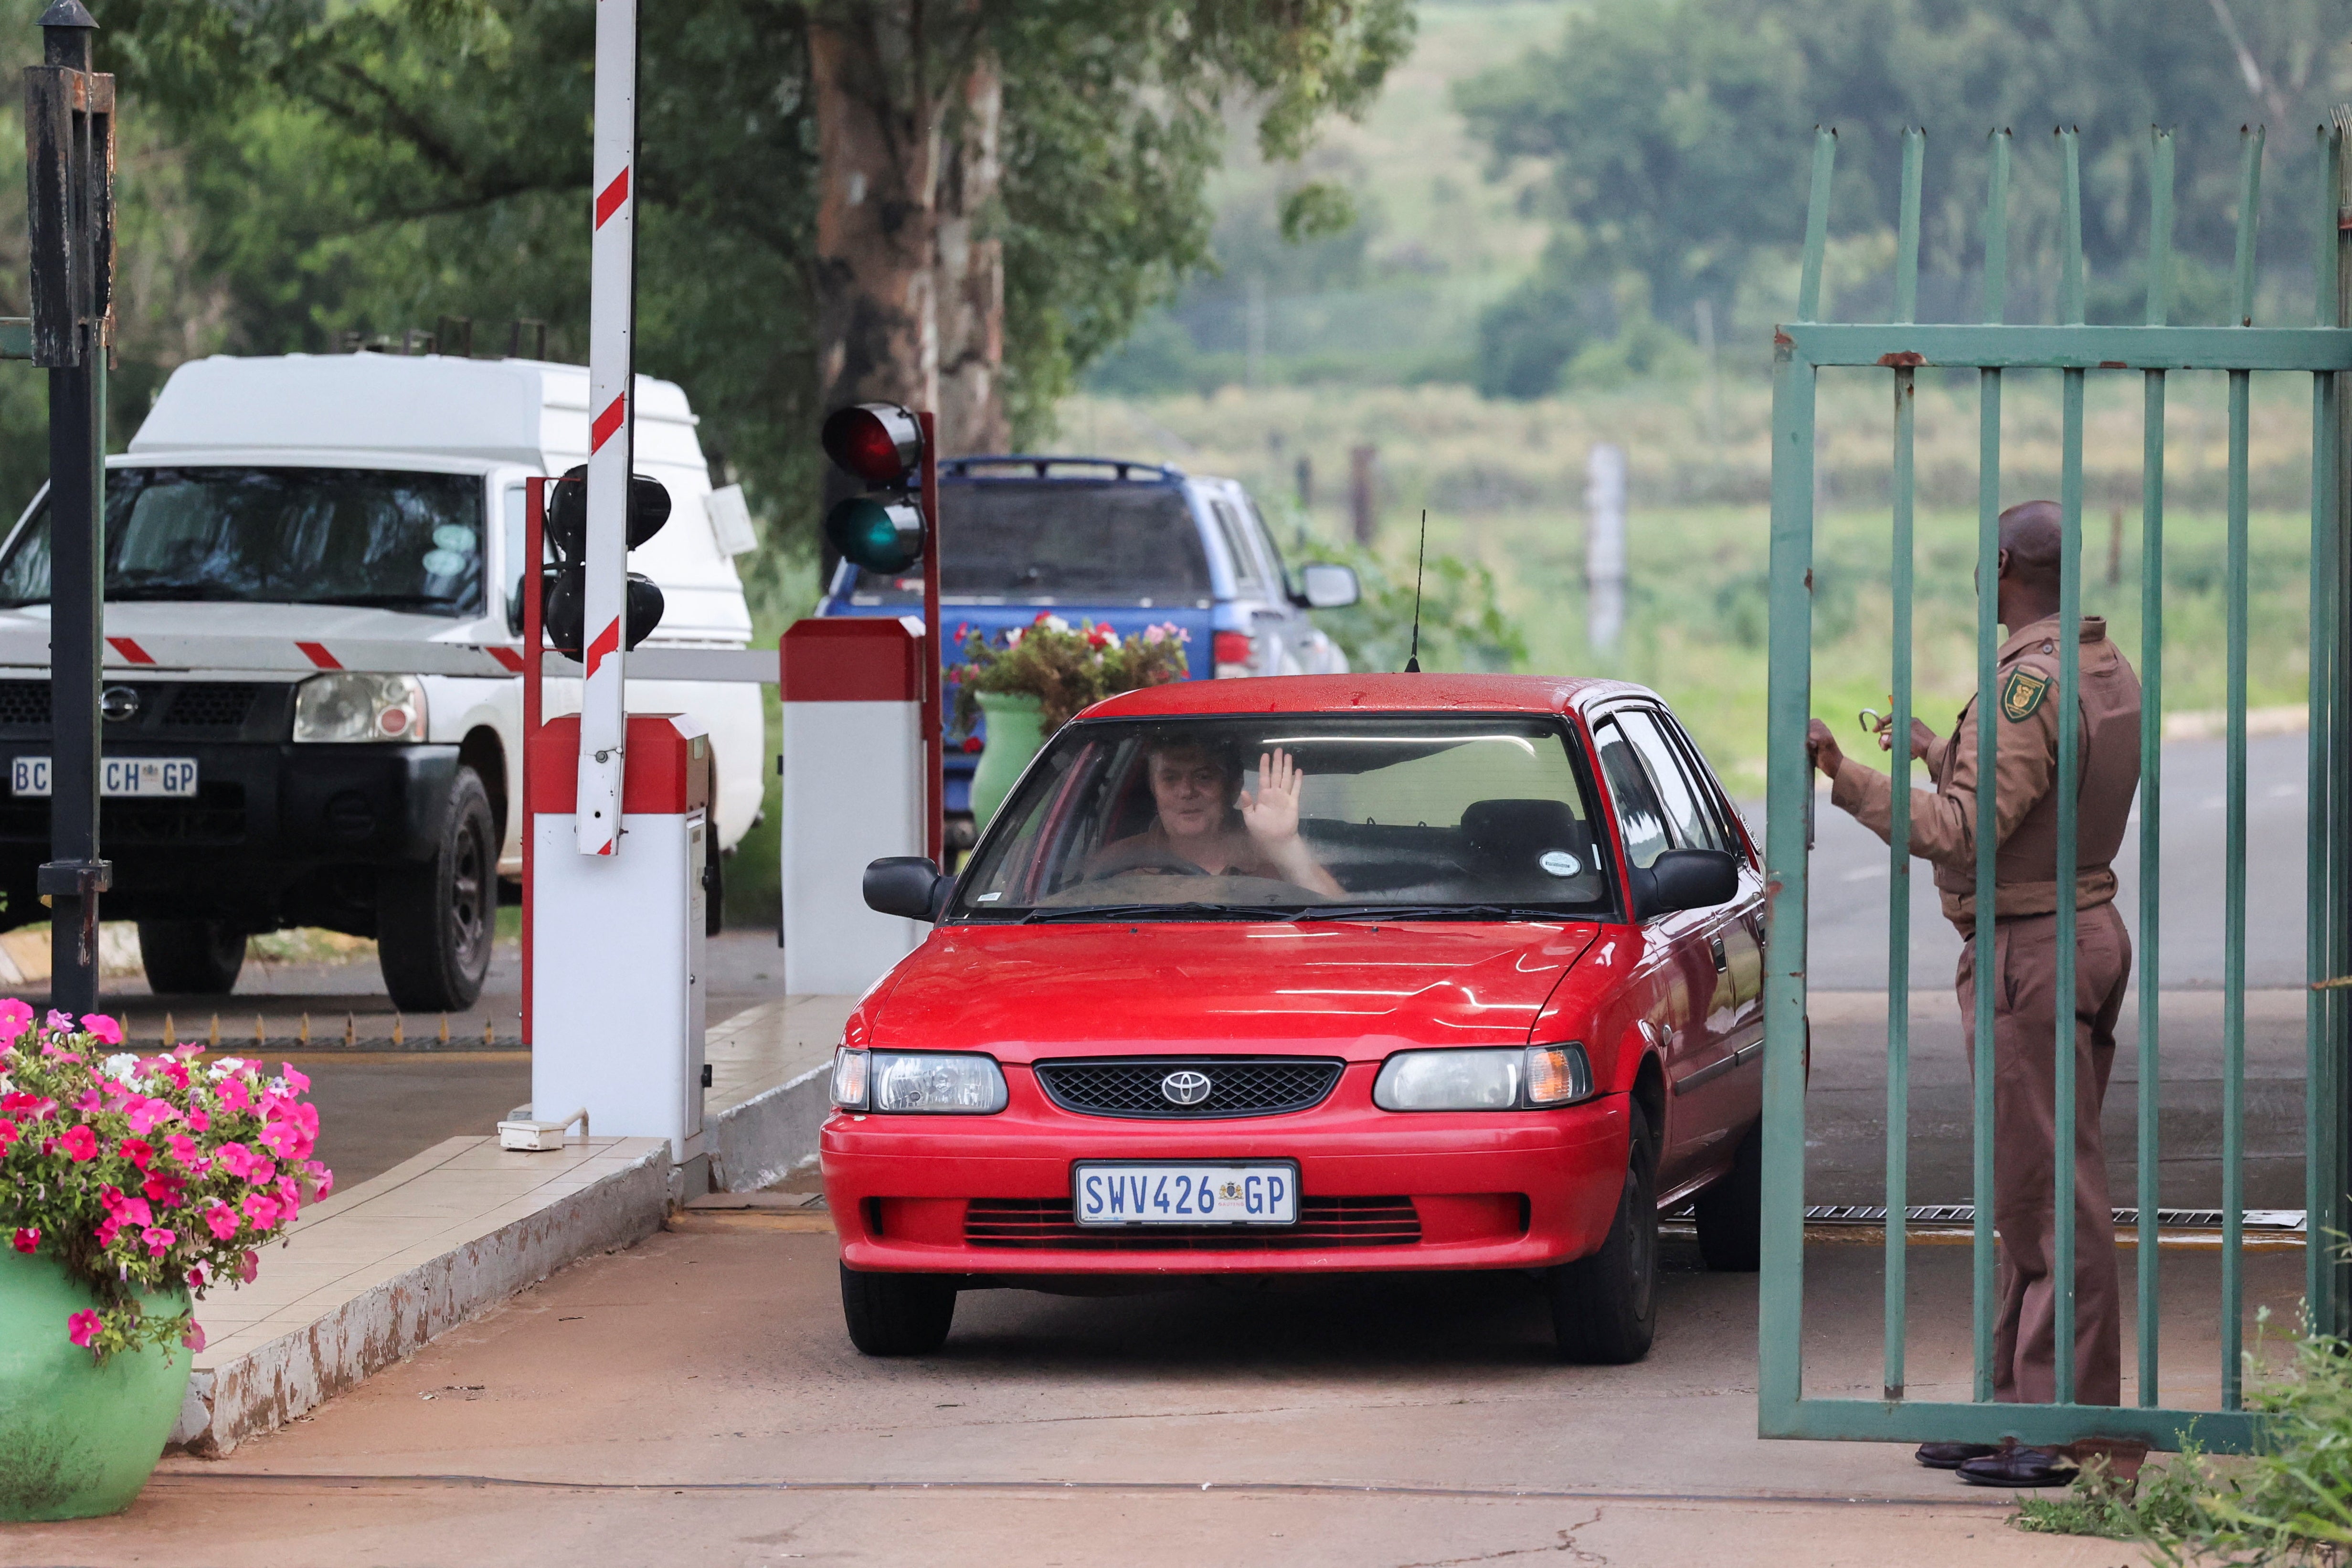 A car drives past the gates as a Correctional Services officer stands guard at the entrance of the Atteridgeville Correctional Centre, where South African athlete Oscar Pistorius, convicted of killing his girlfriend Reeva Steenkamp in 2013, is due to be released on parole, in Pretoria, South Africa